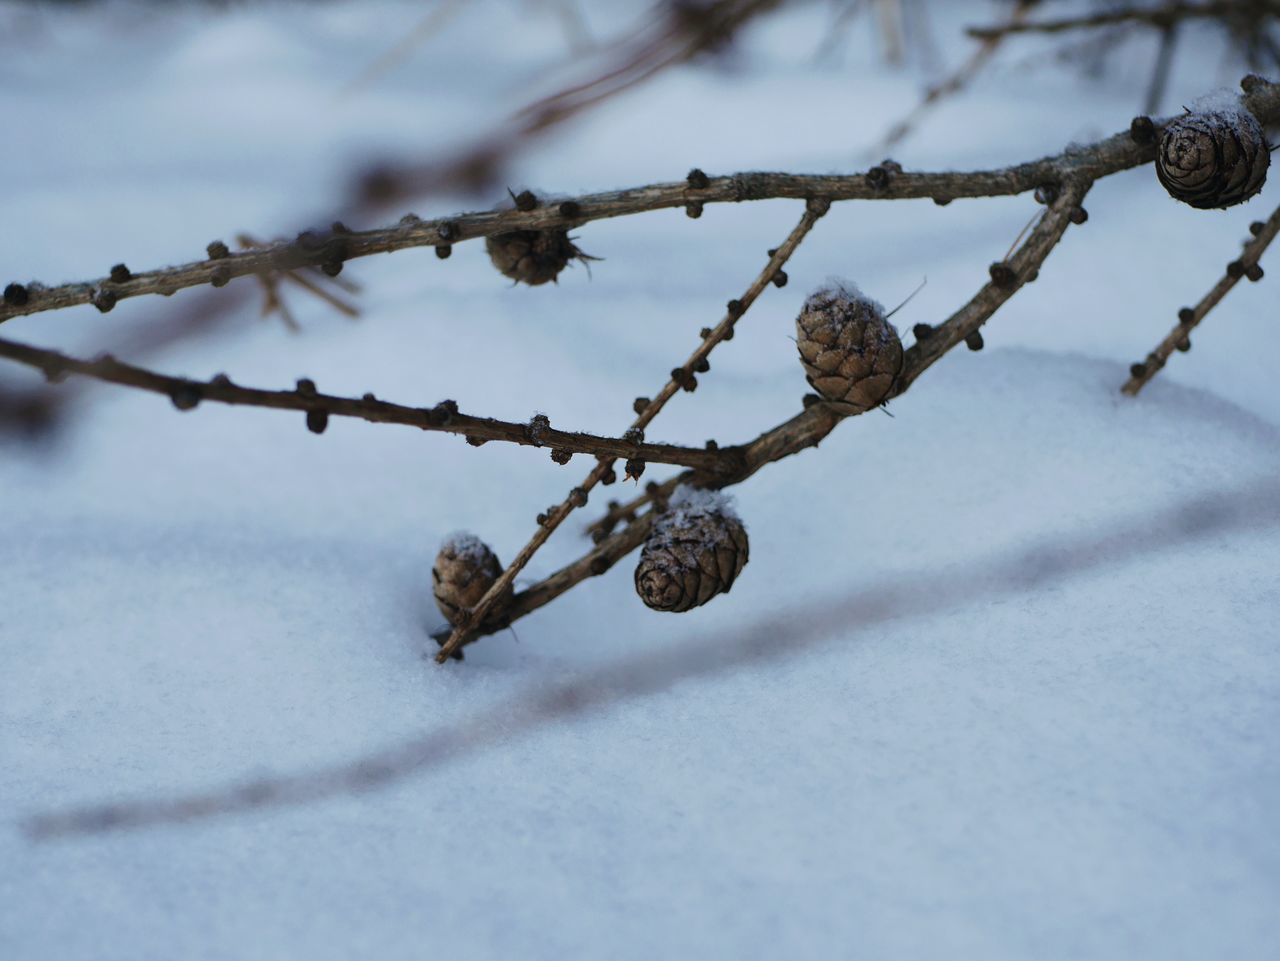 cold temperature, winter, nature, outdoors, twig, snow, no people, day, close-up, frozen, branch, beauty in nature, tree, sky